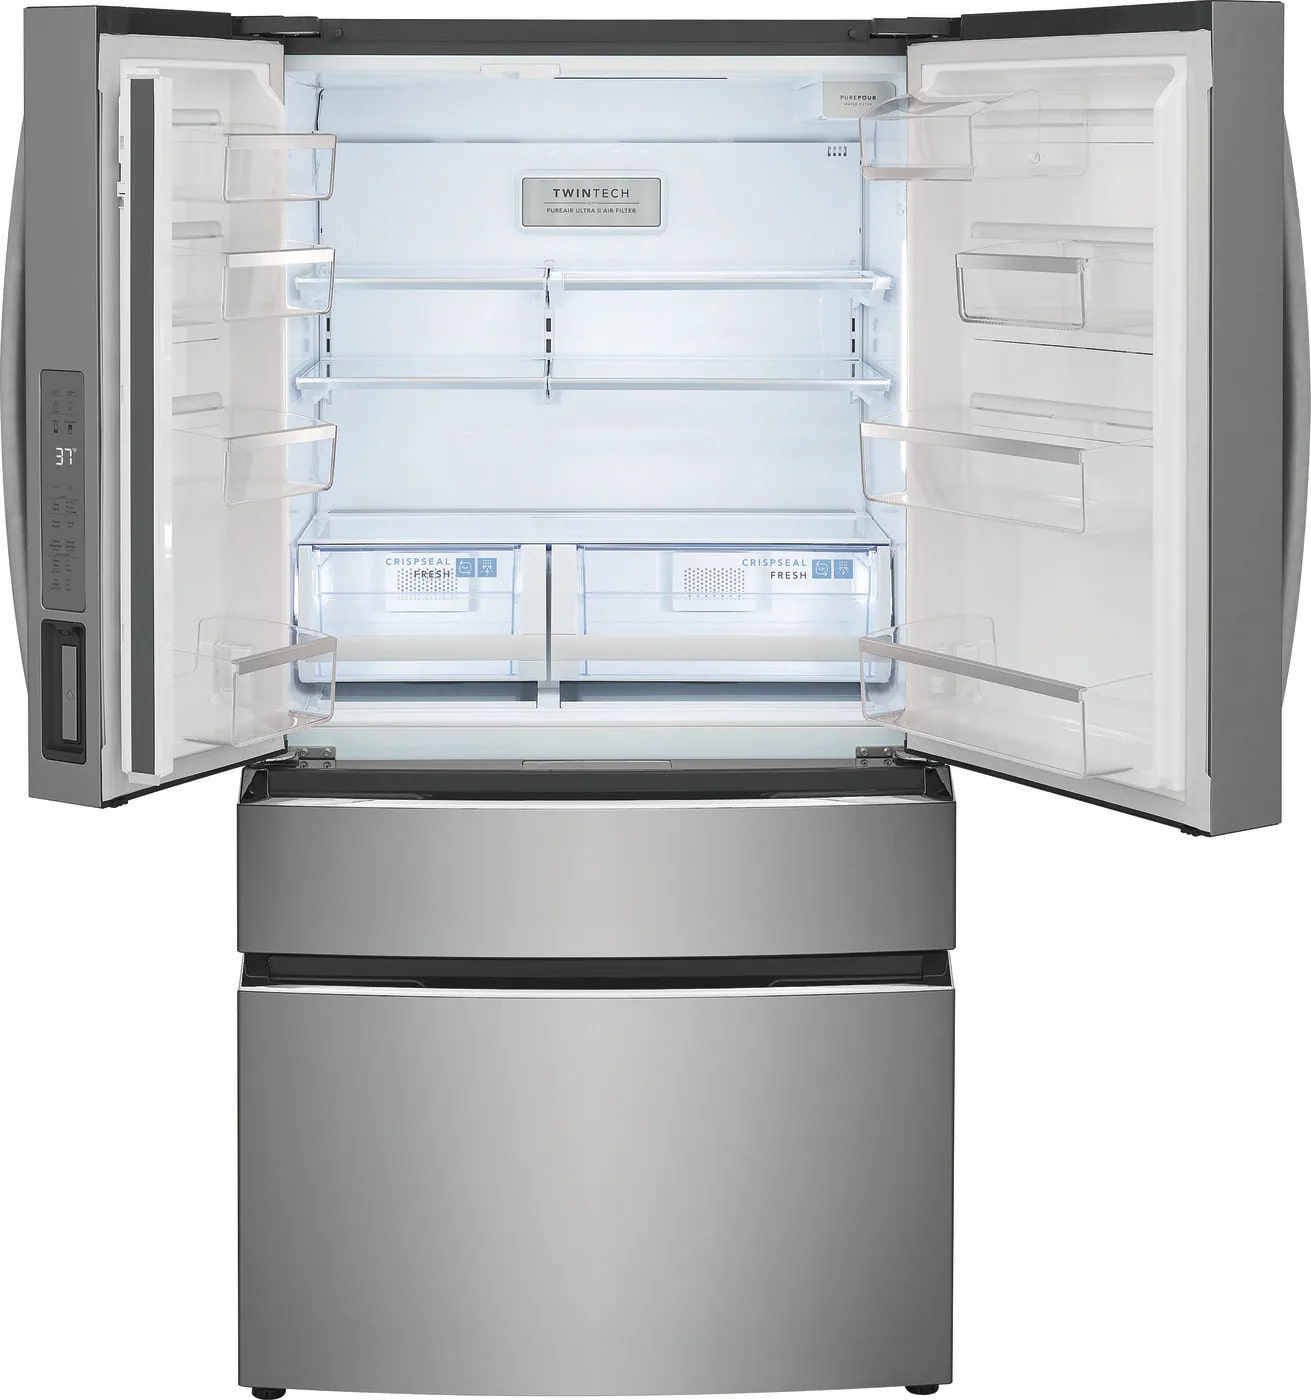 Frigidaire Gallery - 35.9 Inch 22.1 cu. ft French Door Refrigerator in Stainless - GRMG2272CF